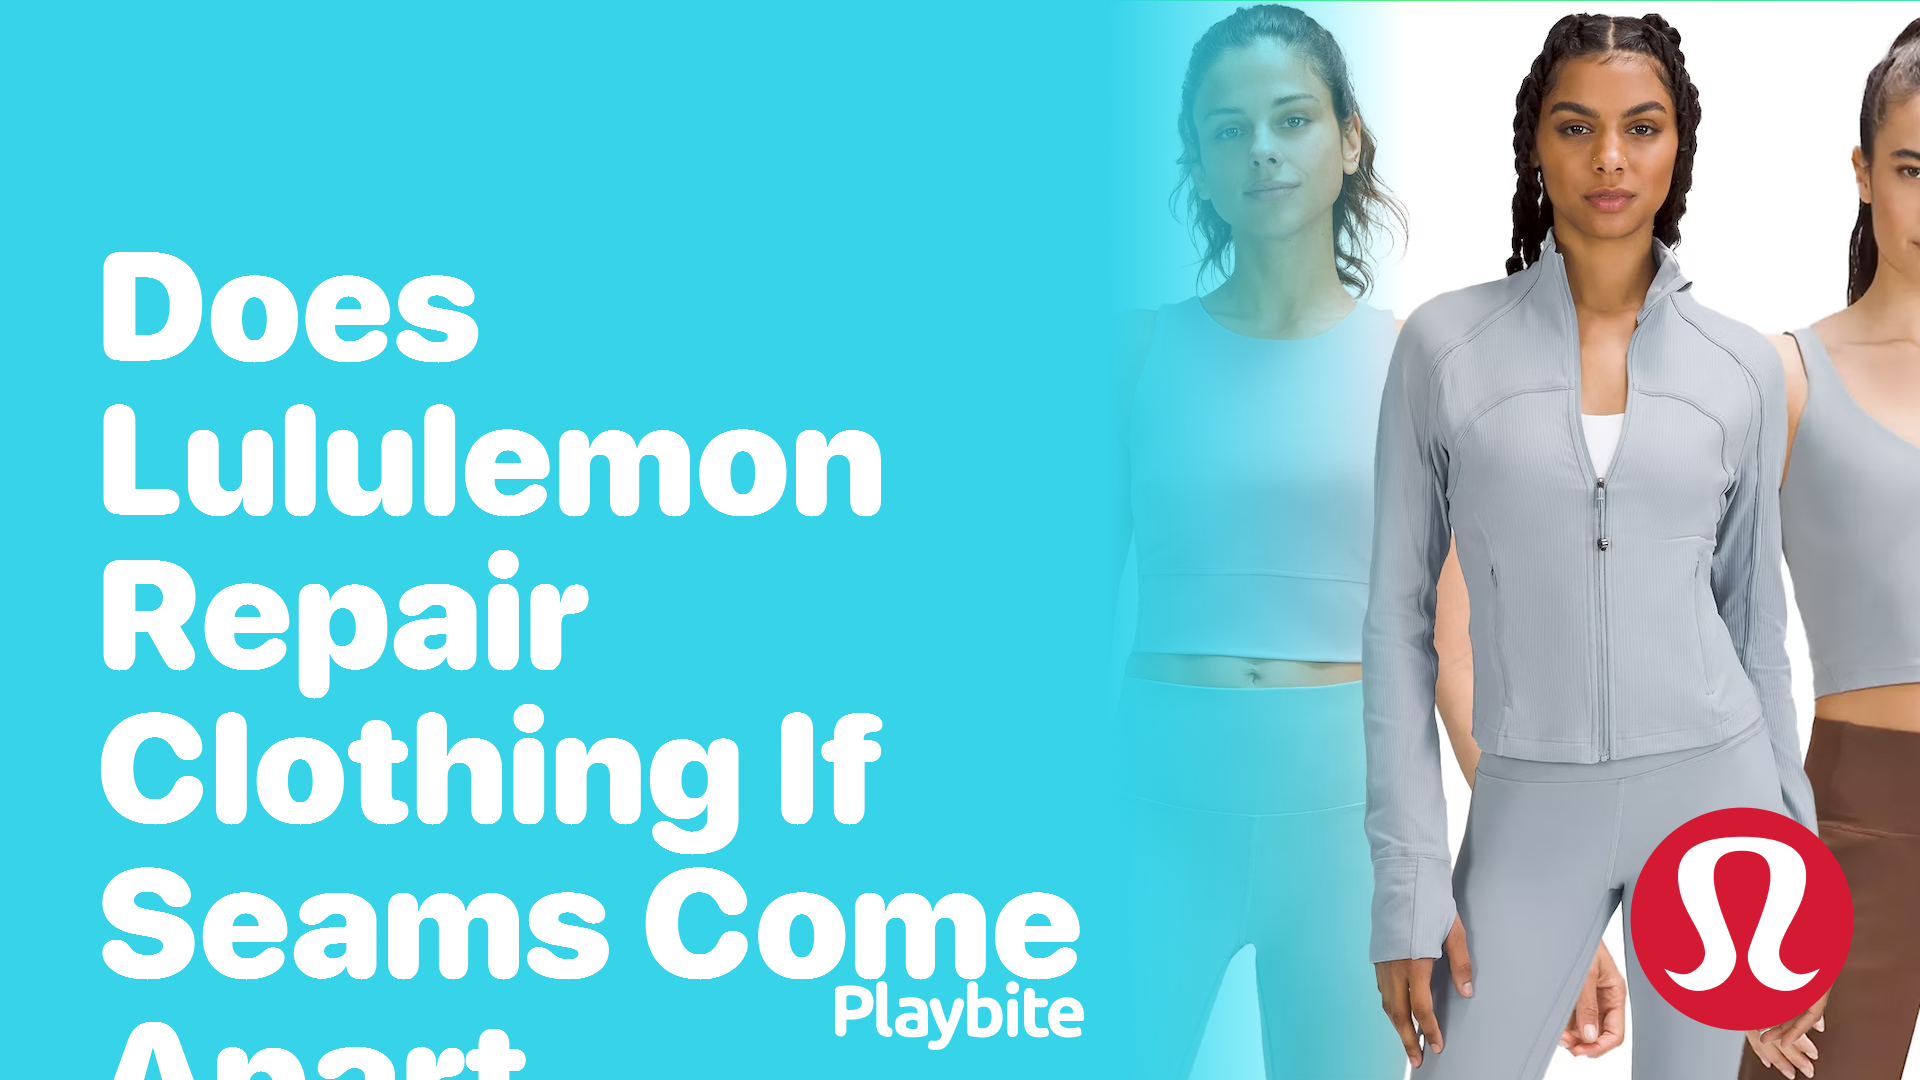 Does Lululemon Repair Clothing If the Seams Come Apart? - Playbite